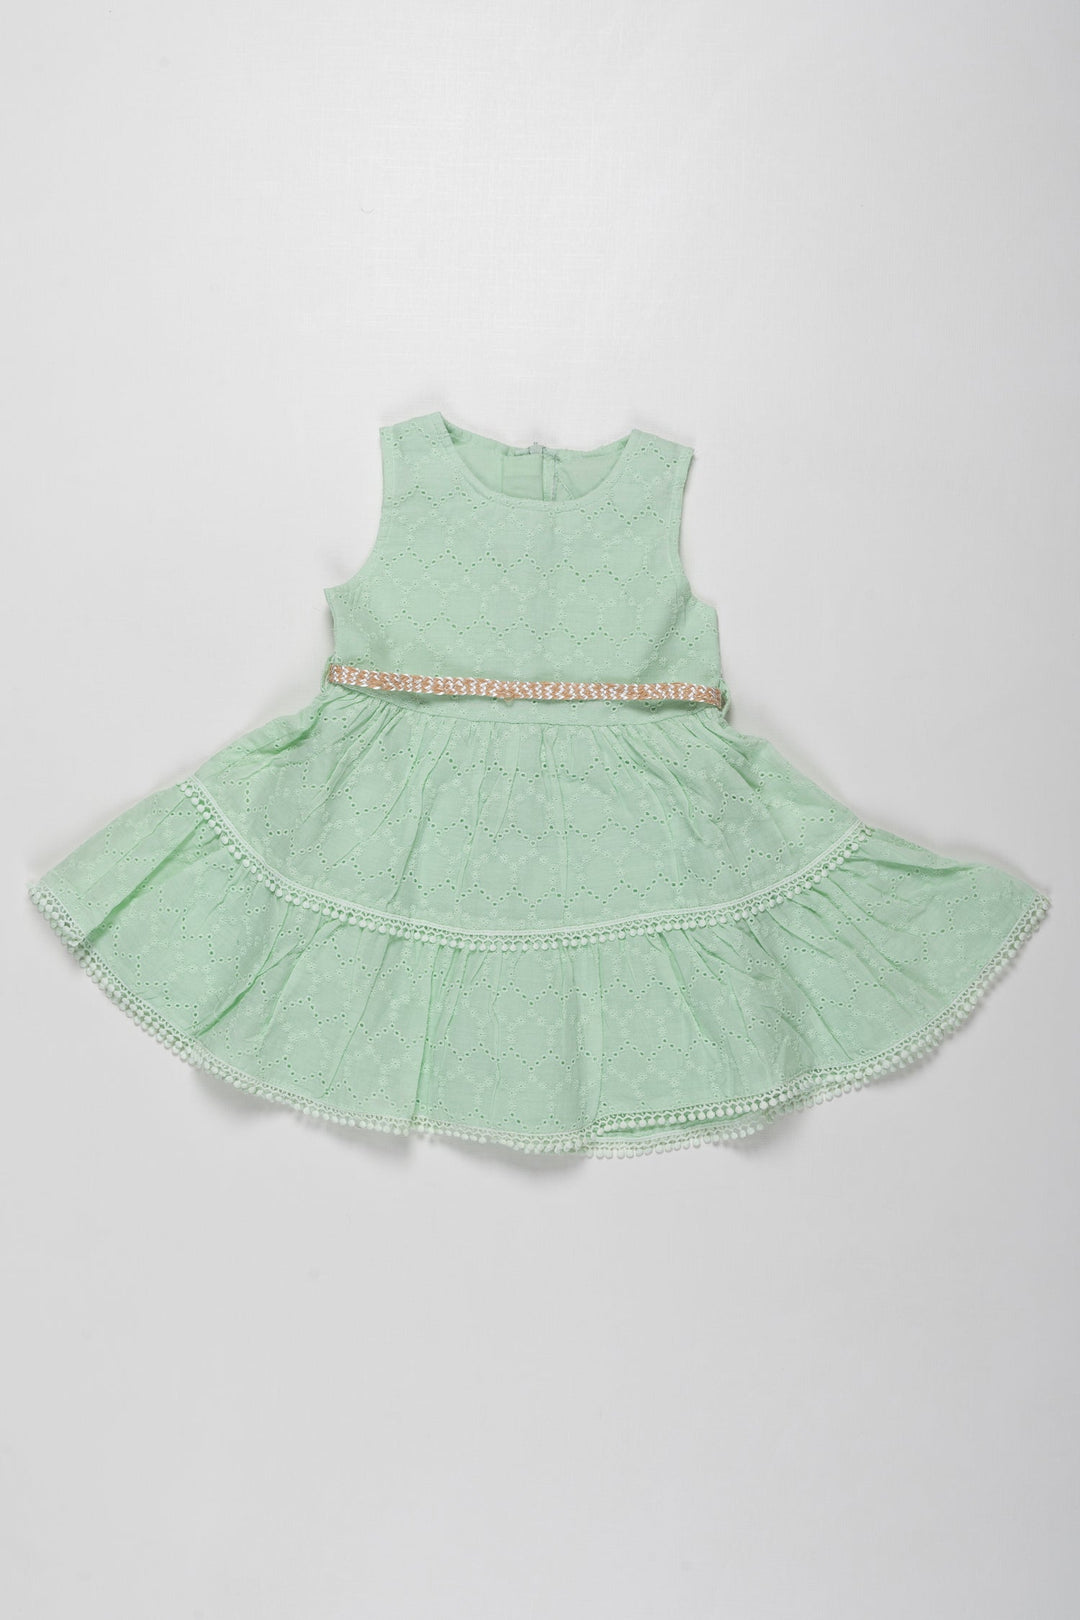 The Nesavu Baby Cotton Frocks Enchanted Mint Green Baby Girl Cotton Frock - Breathable & Chic Nesavu 14 (6M) / Green / Cotton BFJ535A-14 Baby Girls Mint Green Summer Frock | Cotton Comfort & Style | The Nesavu